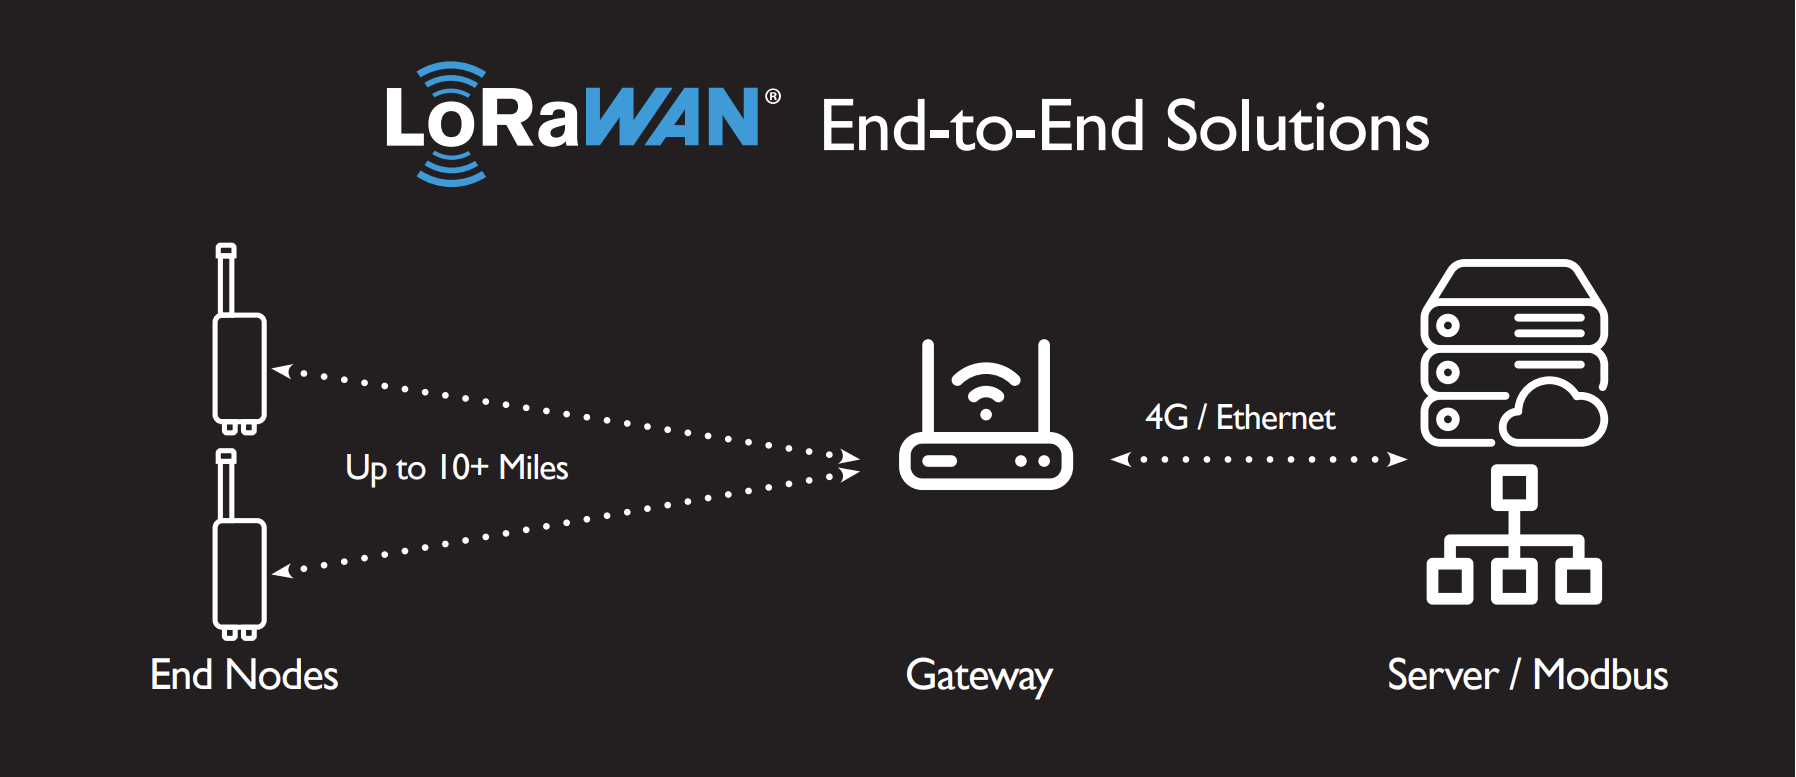 LoRaWAN End to End Solutions